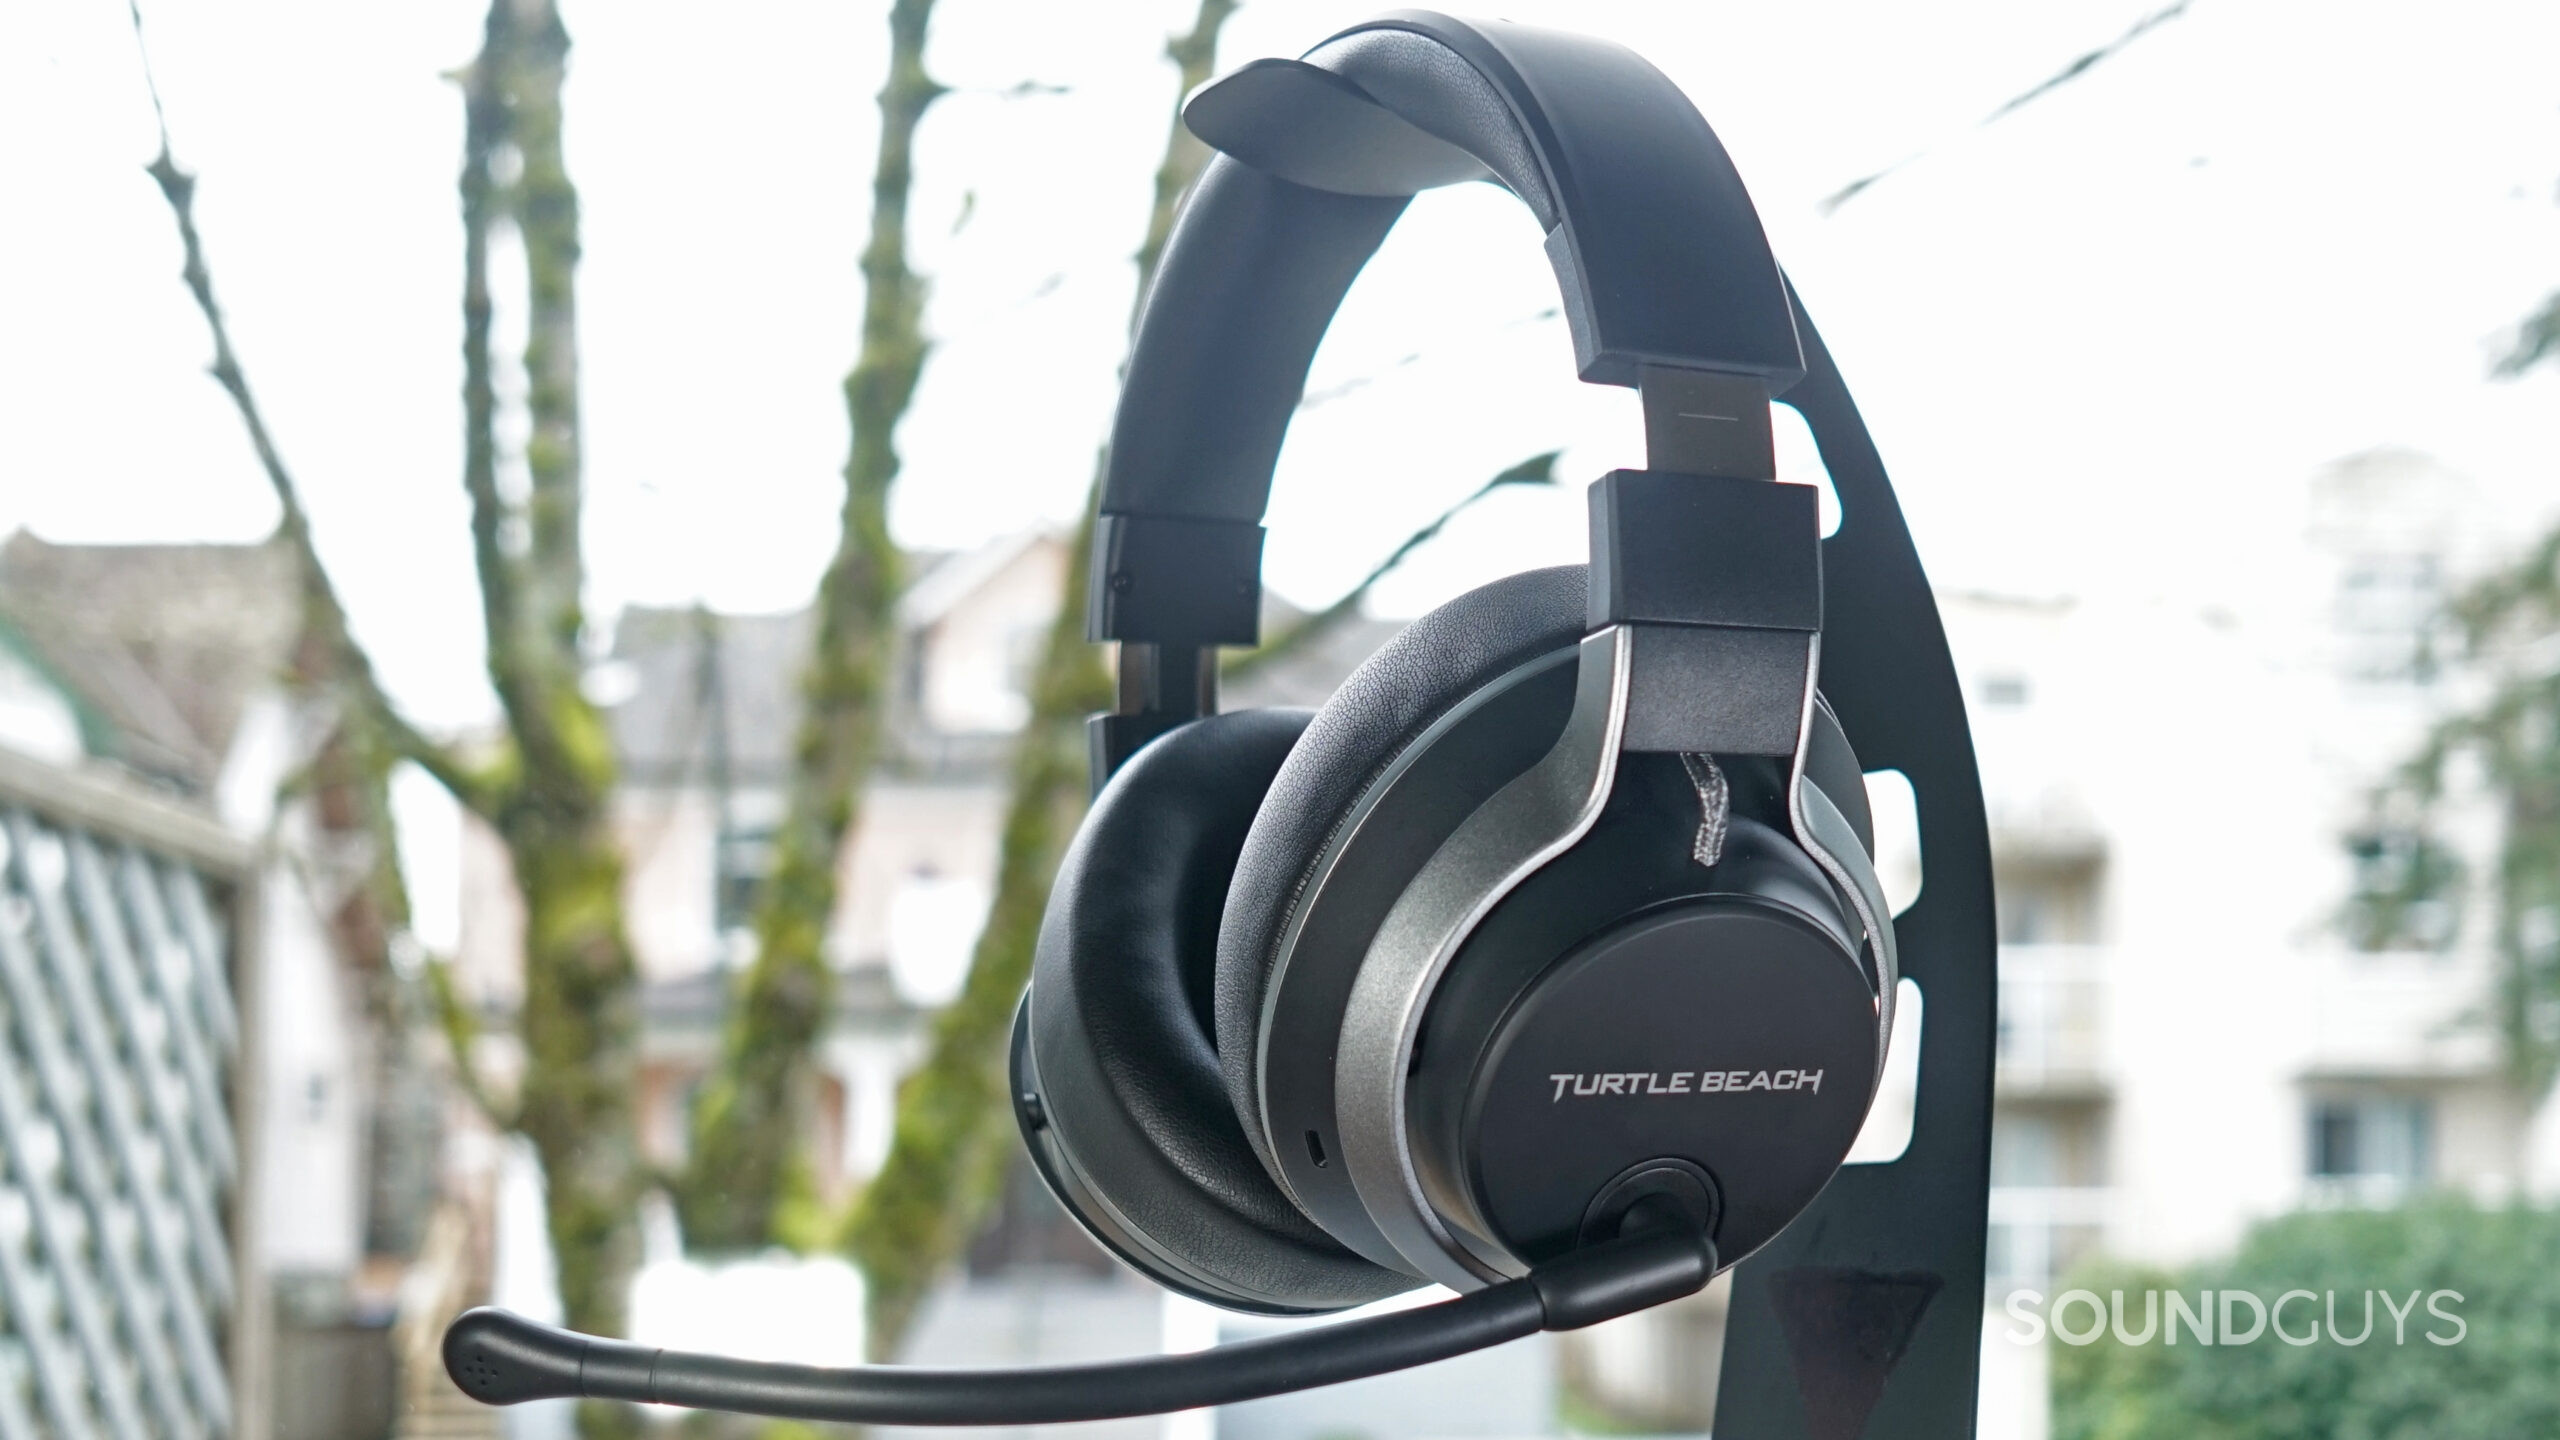 Turtle Beach Stealth Pro review - SoundGuys